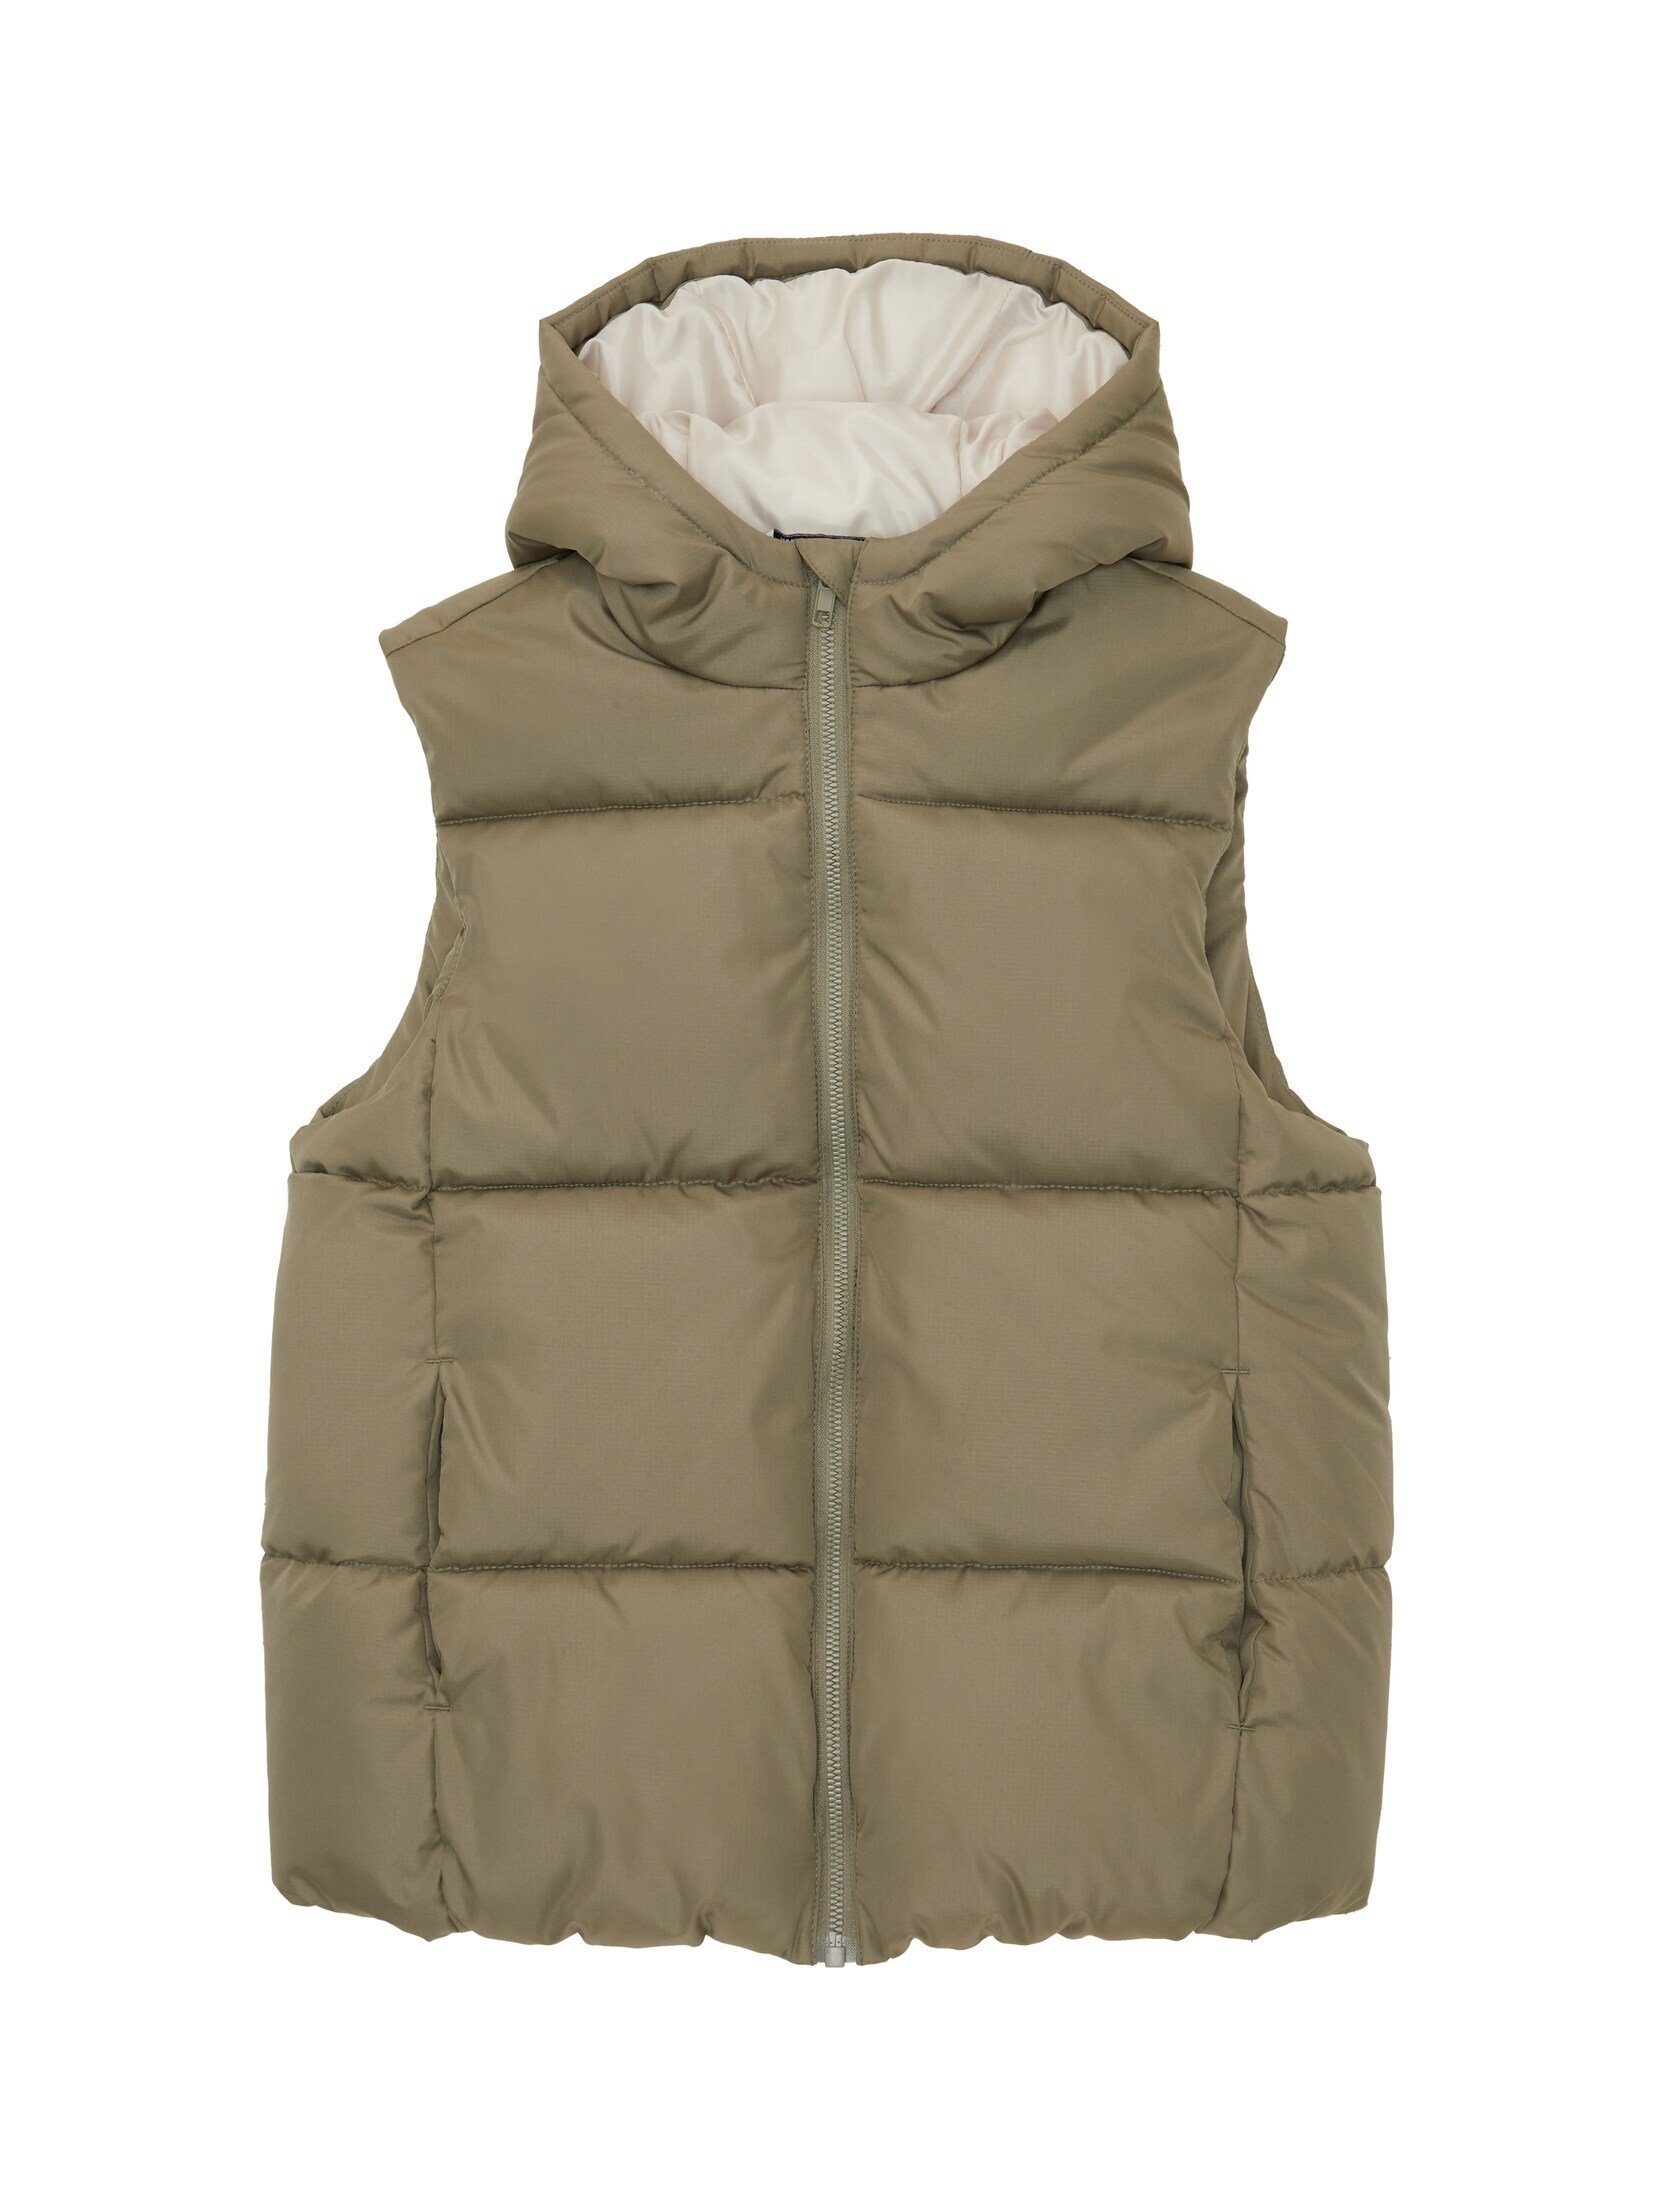 TOM TAILOR Steppweste mit Polyester Green Olive recyceltem Dusty Puffer-Weste